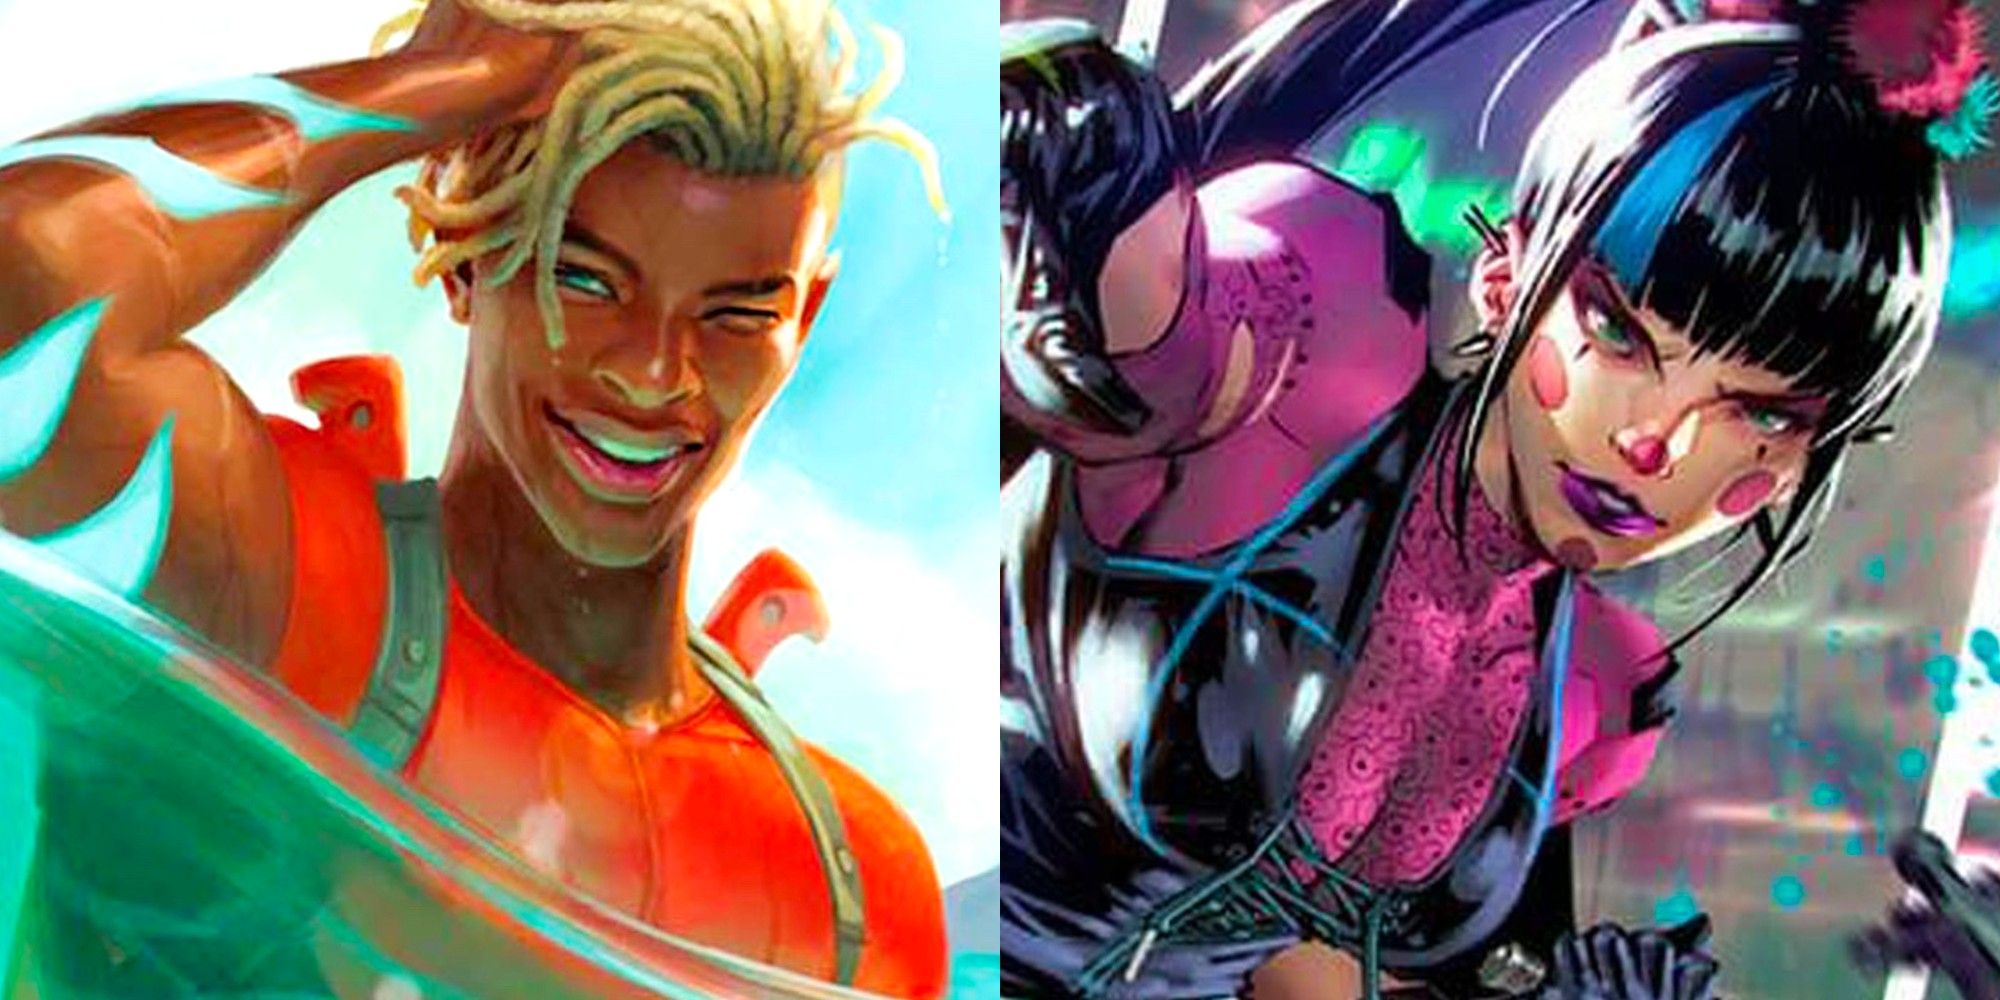 15 Modern DC Comics Characters Fans Love, According To Reddit